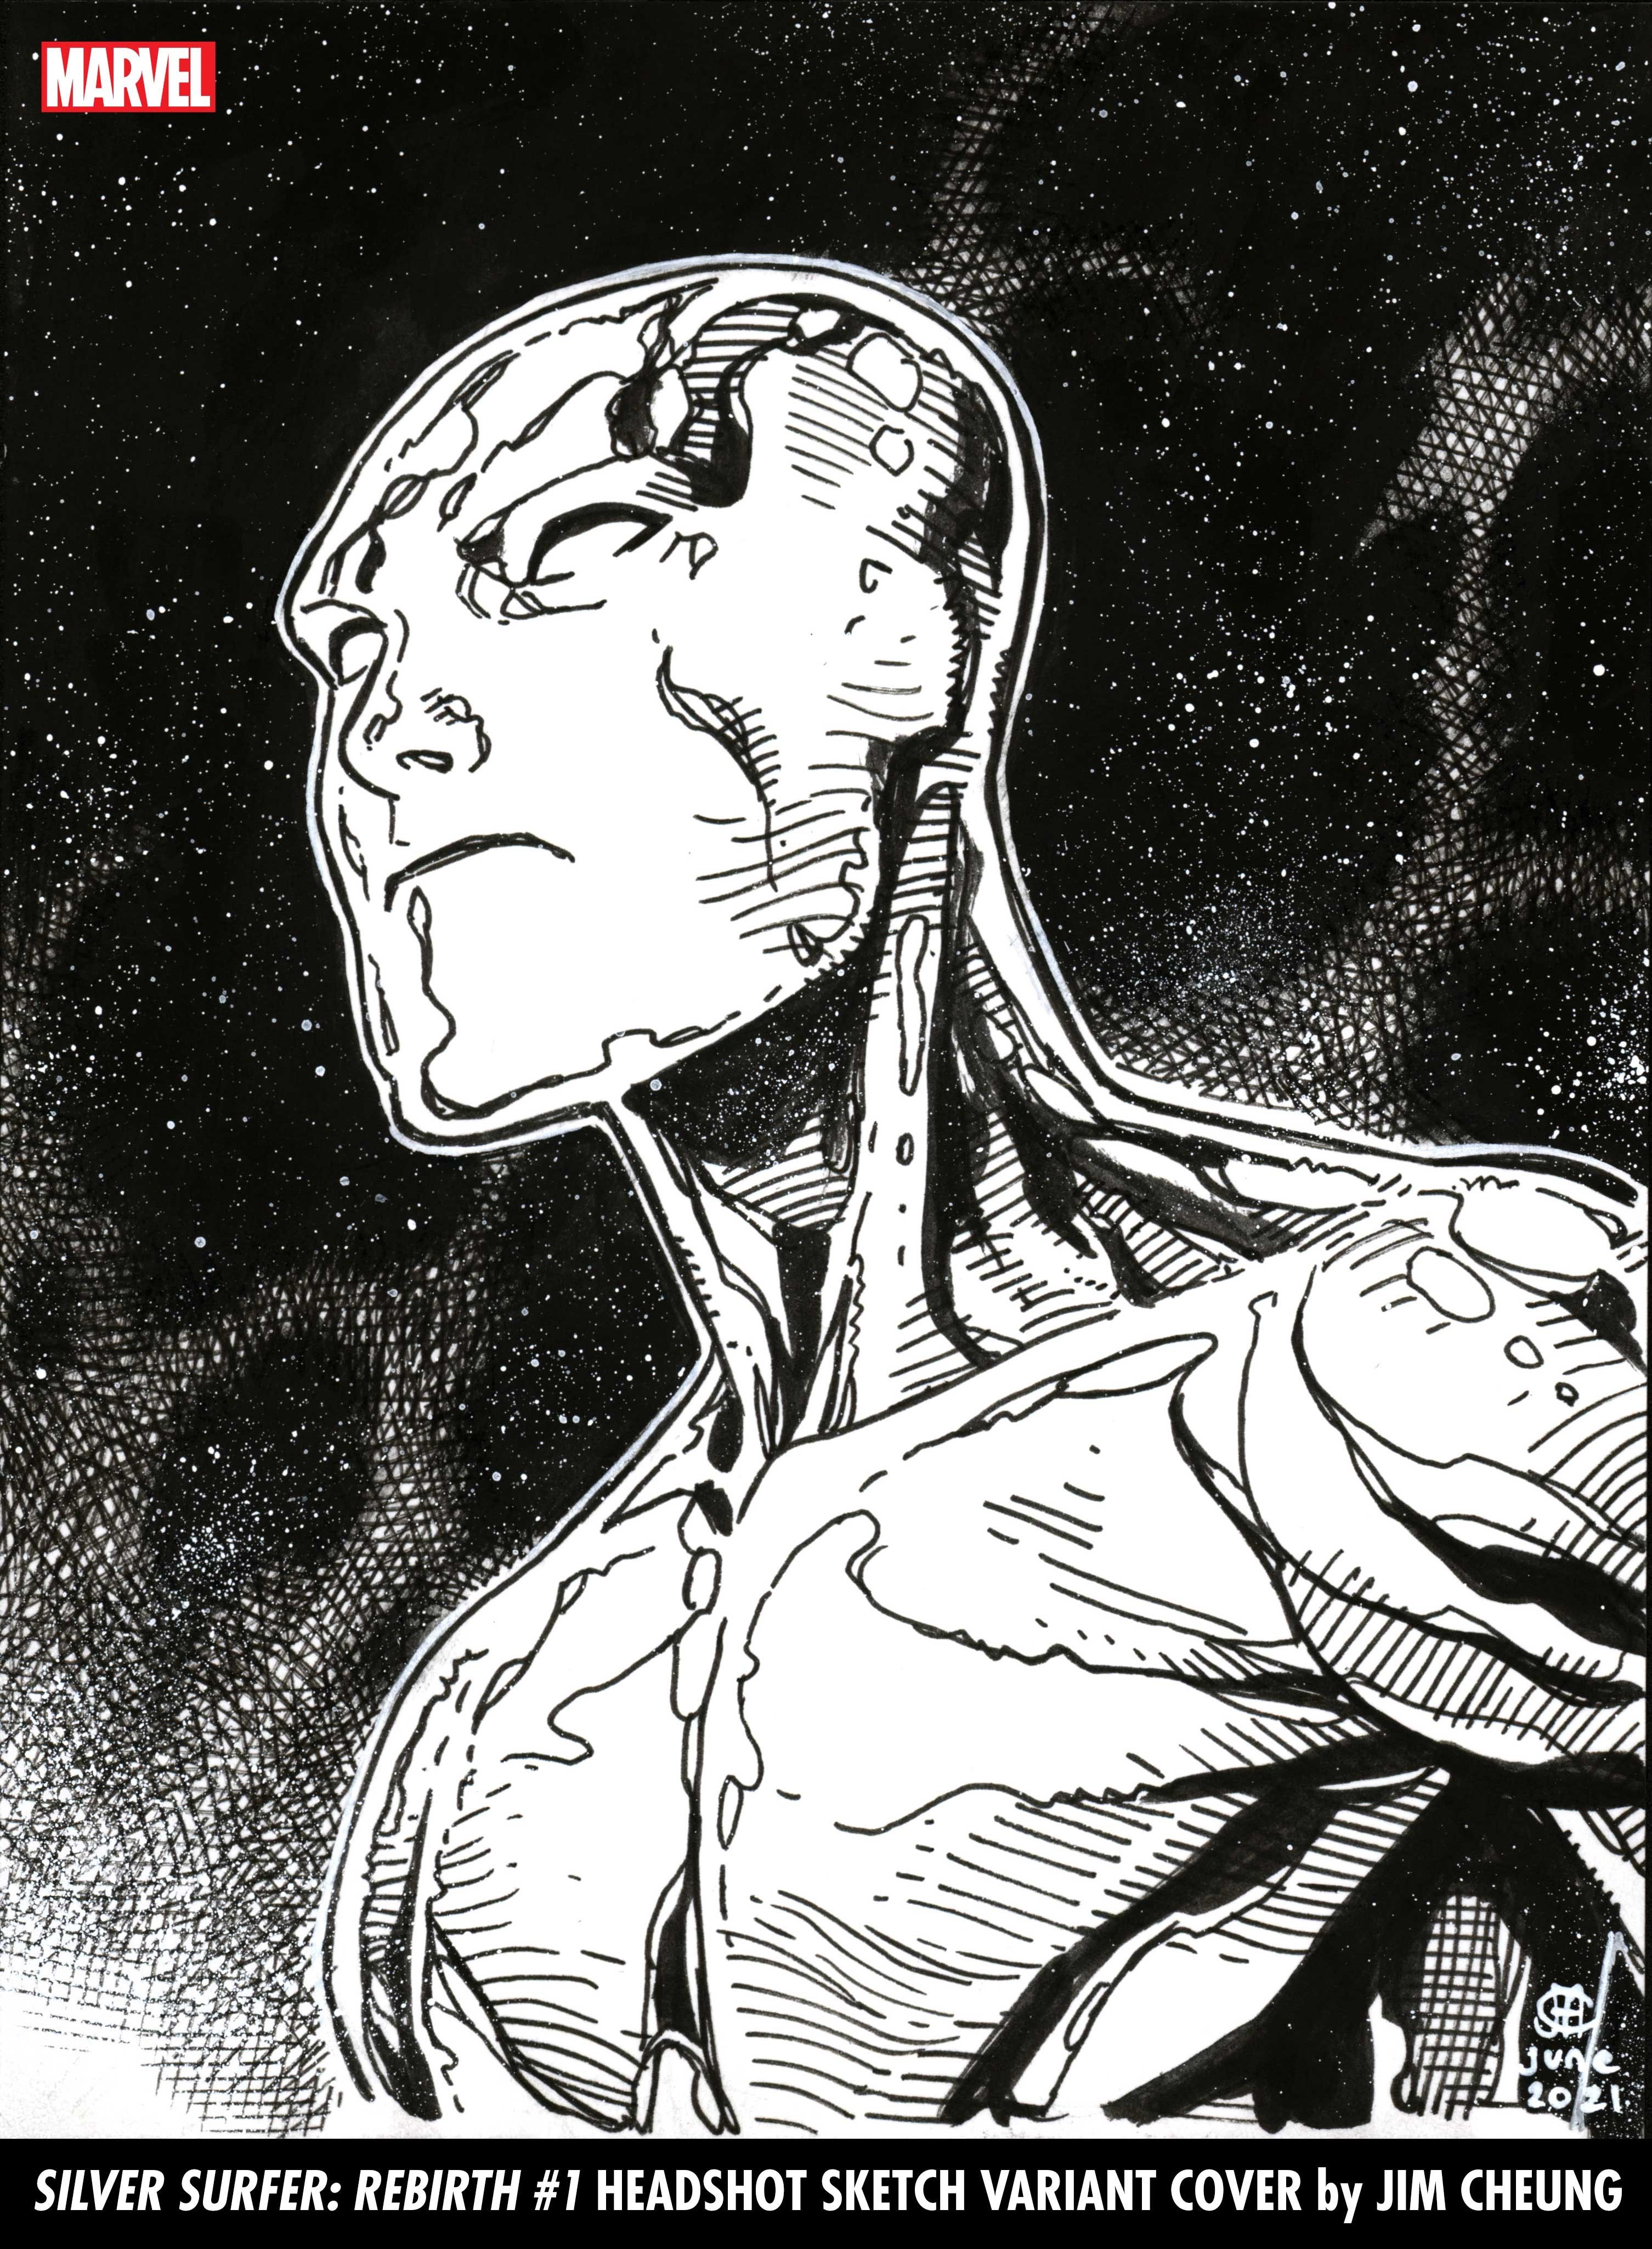 Black and white headshot cover of the Silver Surfer by Jim Cheung